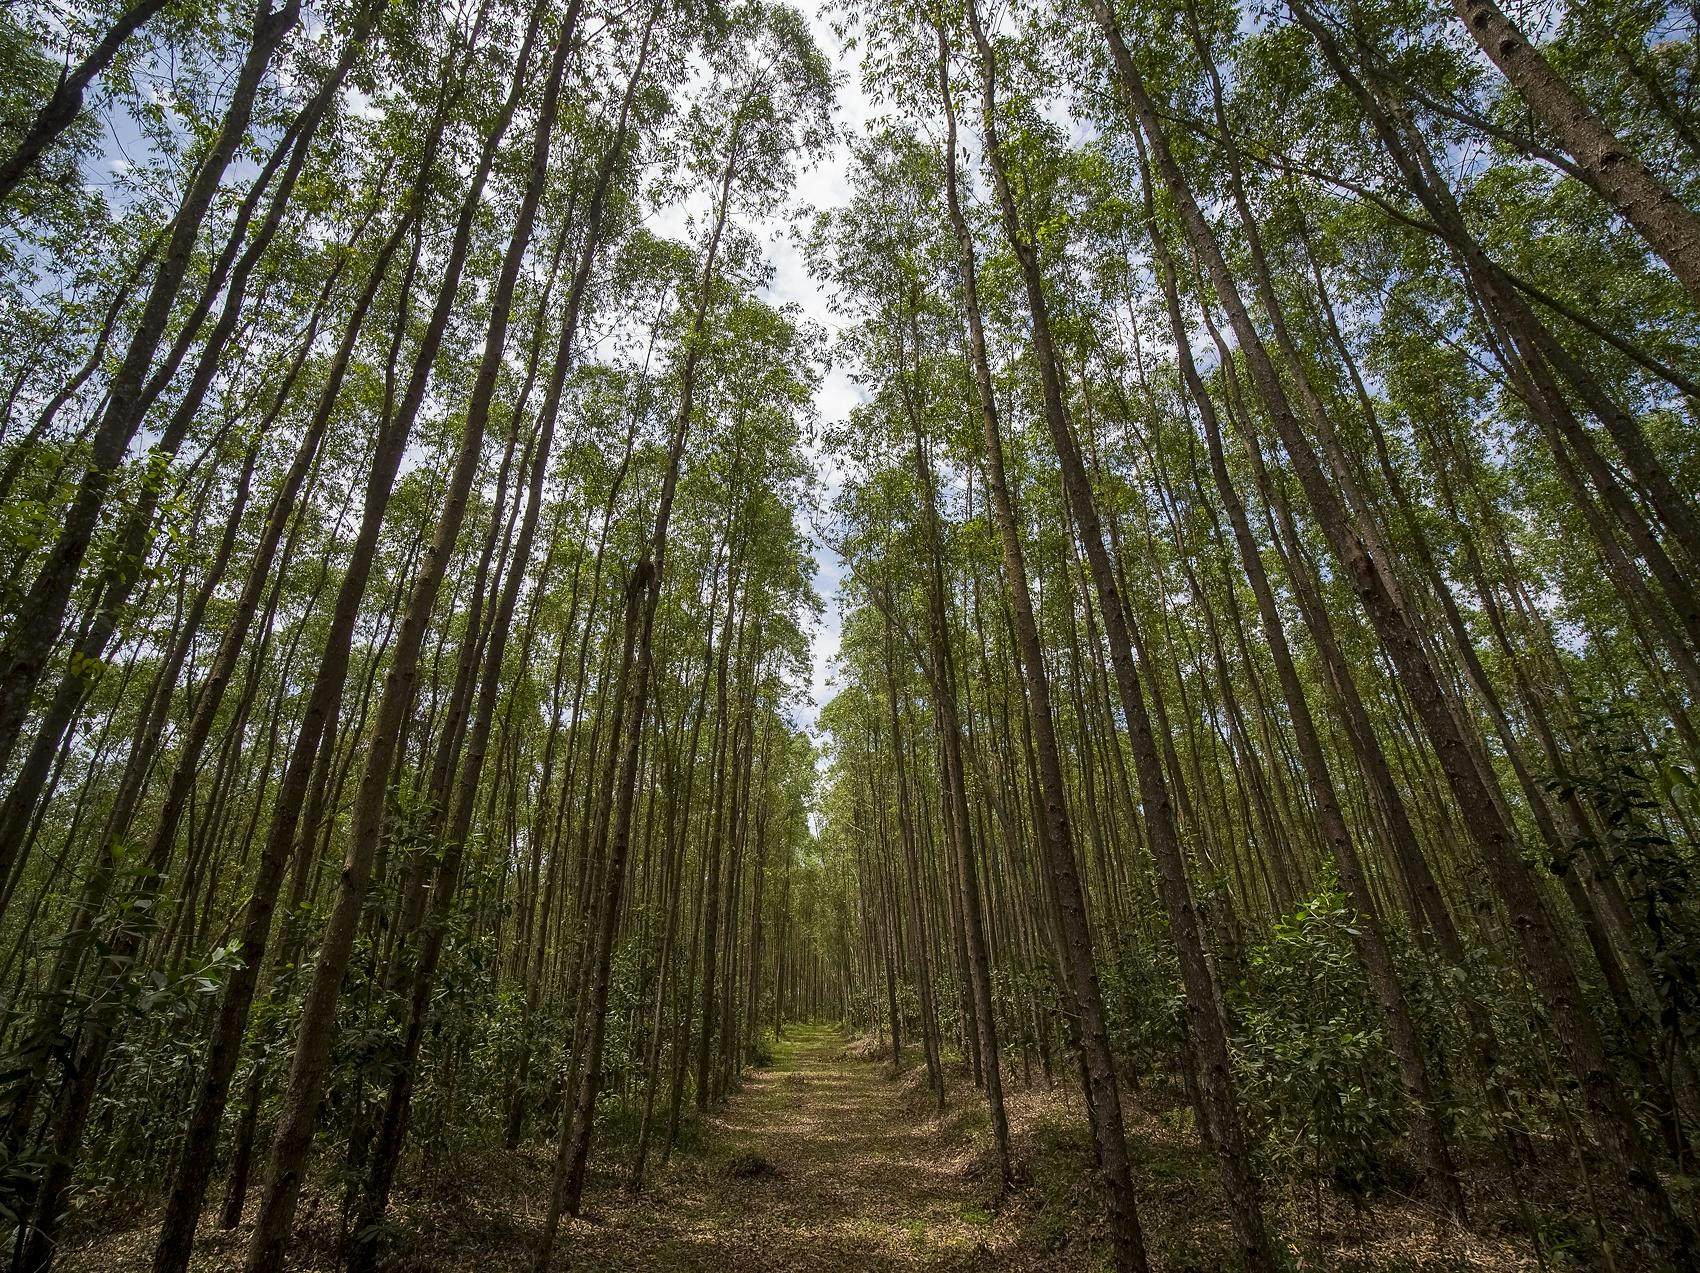 RGE believes that the principles of sustainable forest management are critical to generating enduring economic growth and long-term social benefits, which are key to operating at the heart of the bioeconomy.